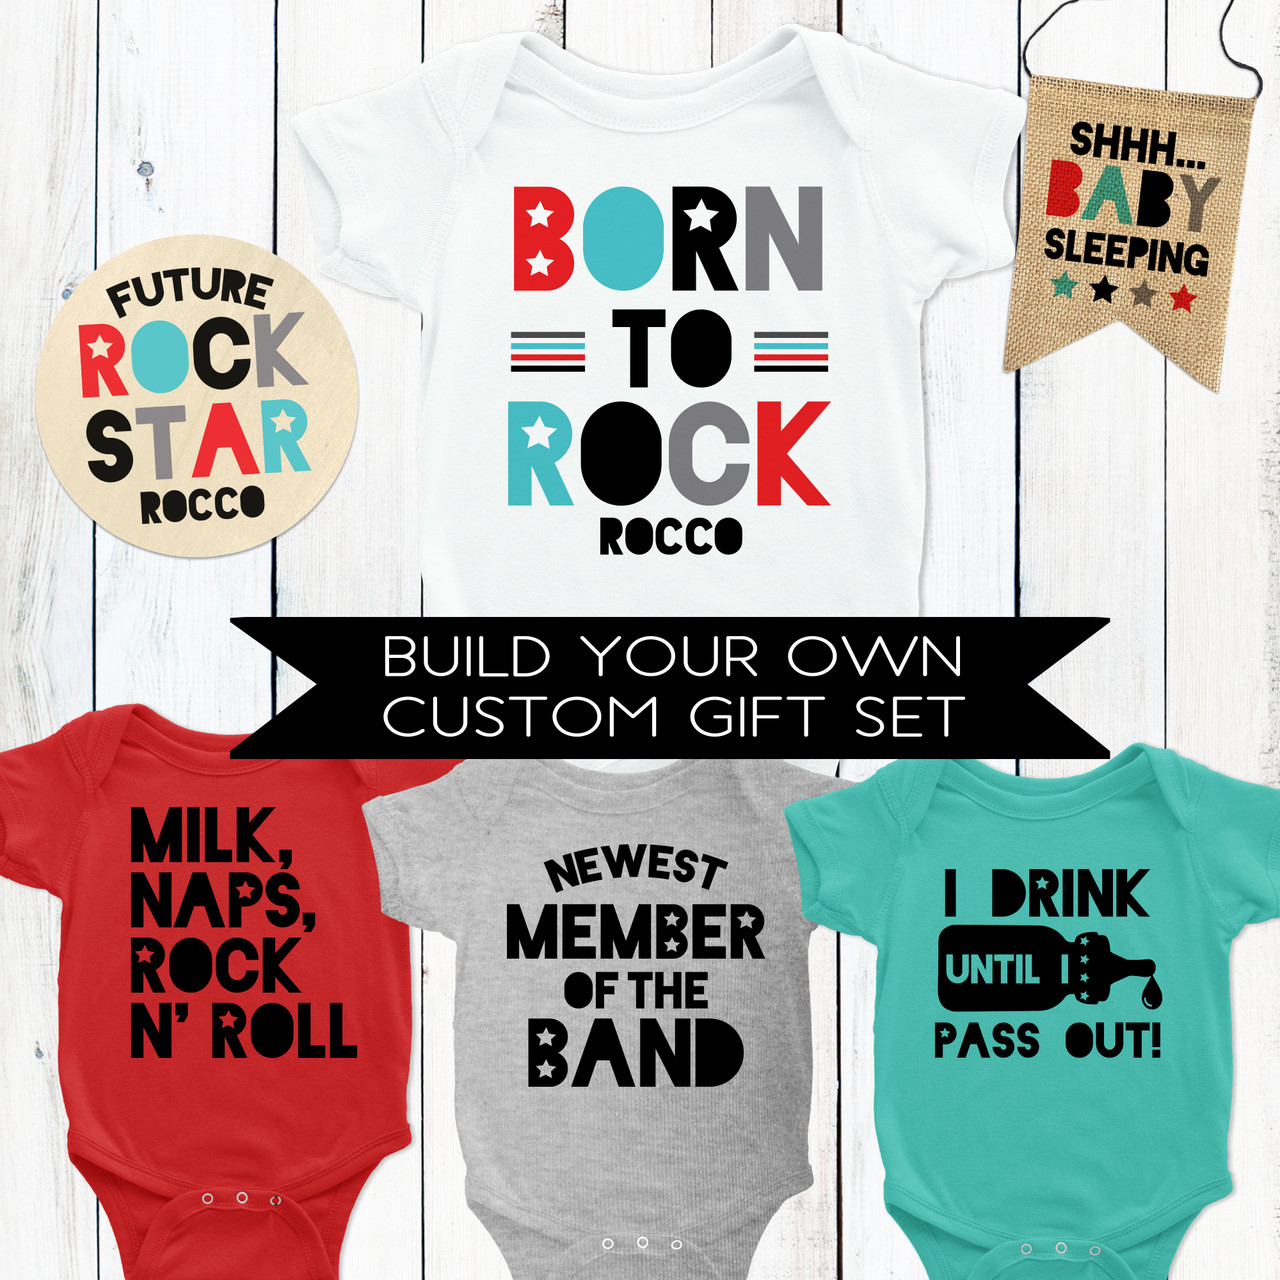 https://cdn11.bigcommerce.com/s-5grzuu6/images/stencil/1280w/products/5078/52778/Born-to-Rock-Red-Gift-Set-with-4-Shirts-Flag-and-Box__12989.1675110164.jpg